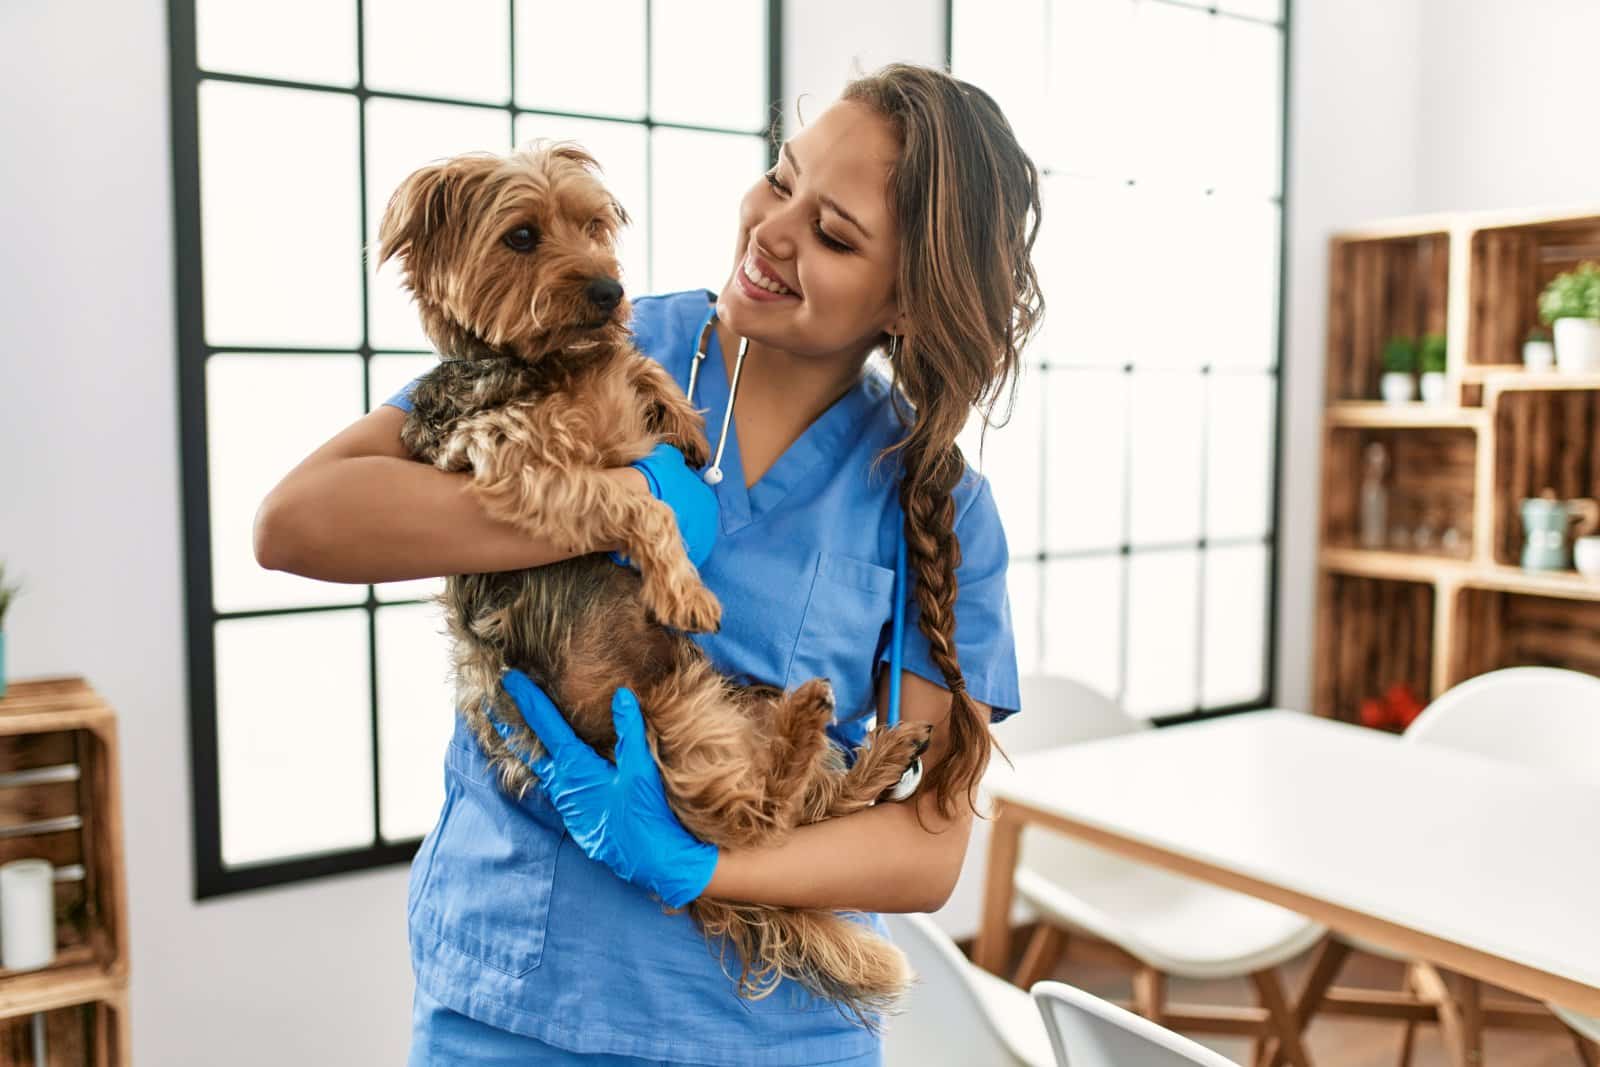 <p class="wp-caption-text">Image Credit: Shutterstock / Krakenimages.com</p>  <p><span>Know where the nearest vet is at your destination. It’s better to have it and not need it than the other way around.</span></p>